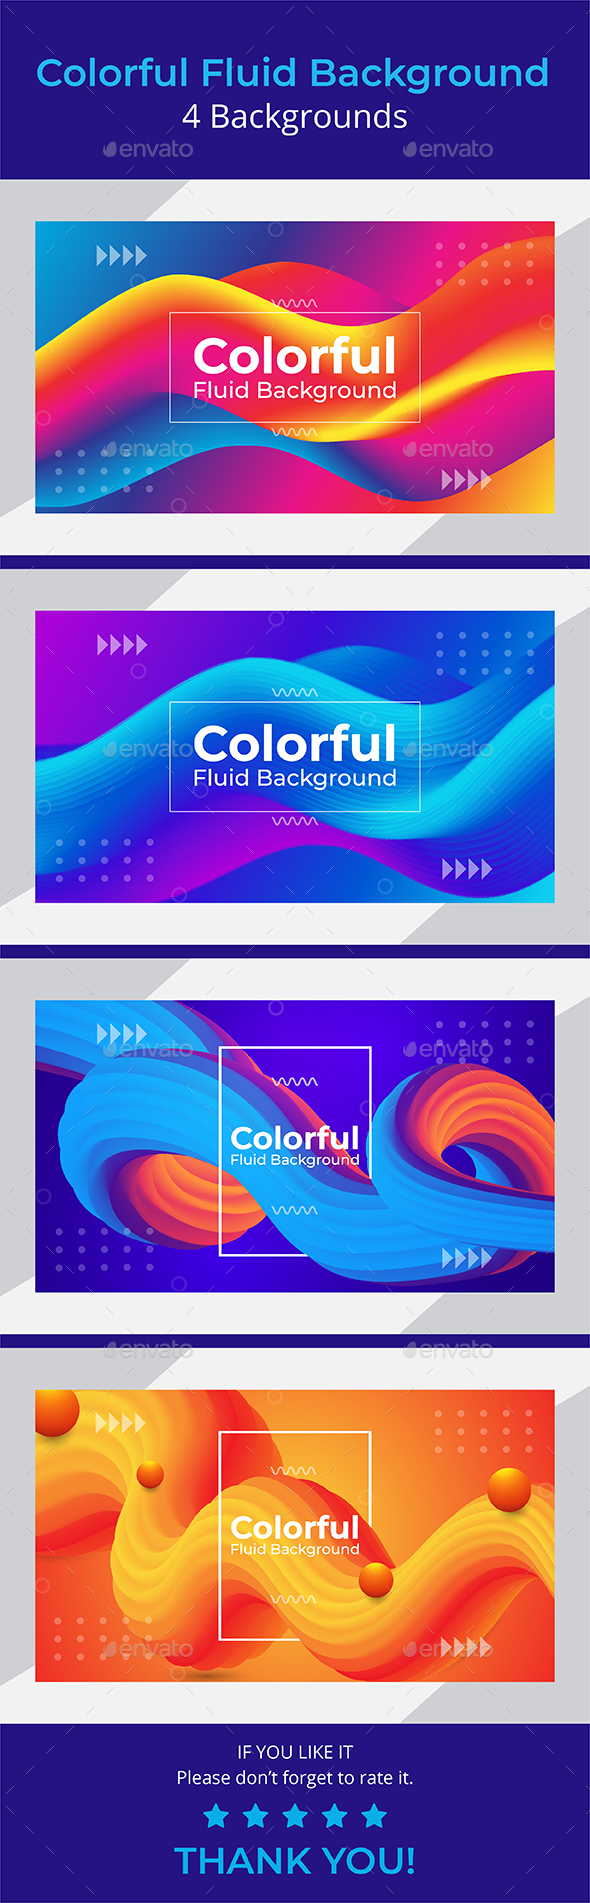 Colorful Fluid background template